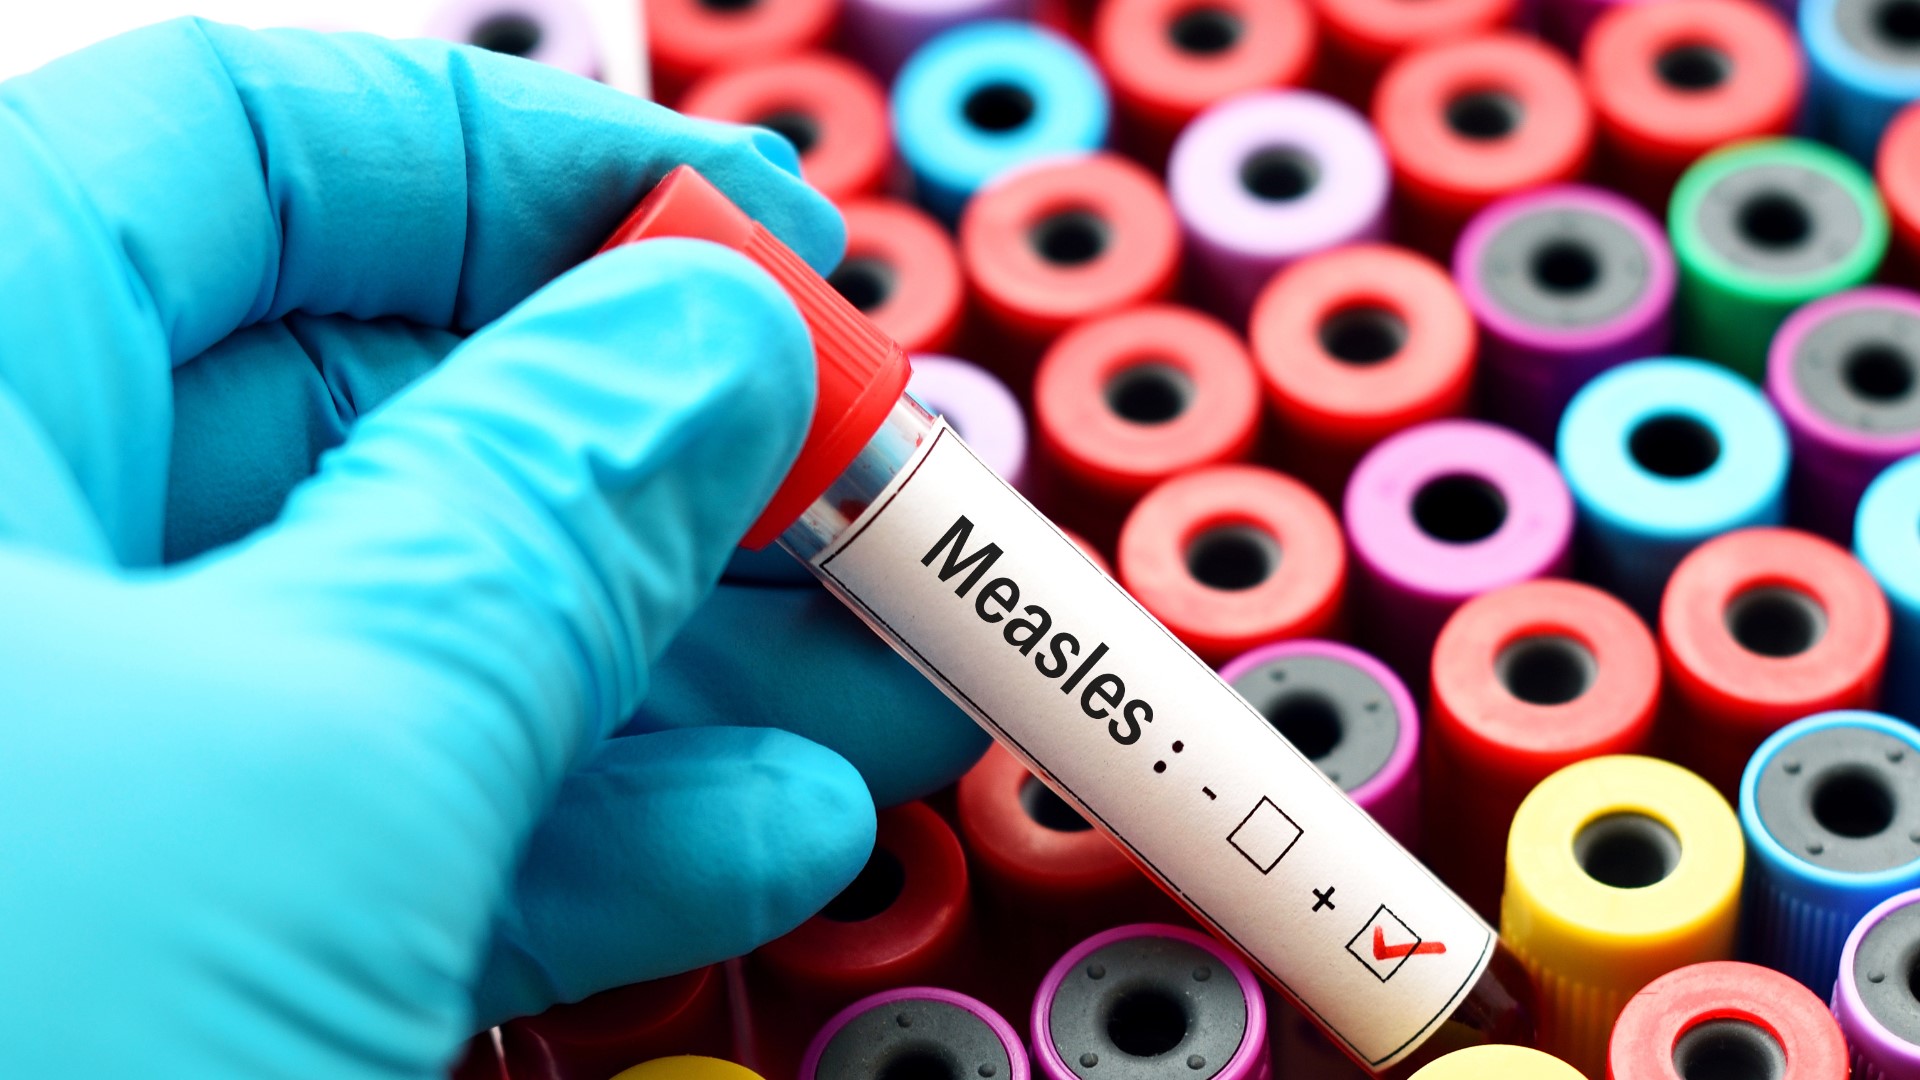 The current measles outbreak across the country is the largest since it was declared eliminated in 2000. Nearly 700 measles cases have been reported. As of Friday, around 300 students at Cal State -Los Angeles and UCLA were under quarantine.